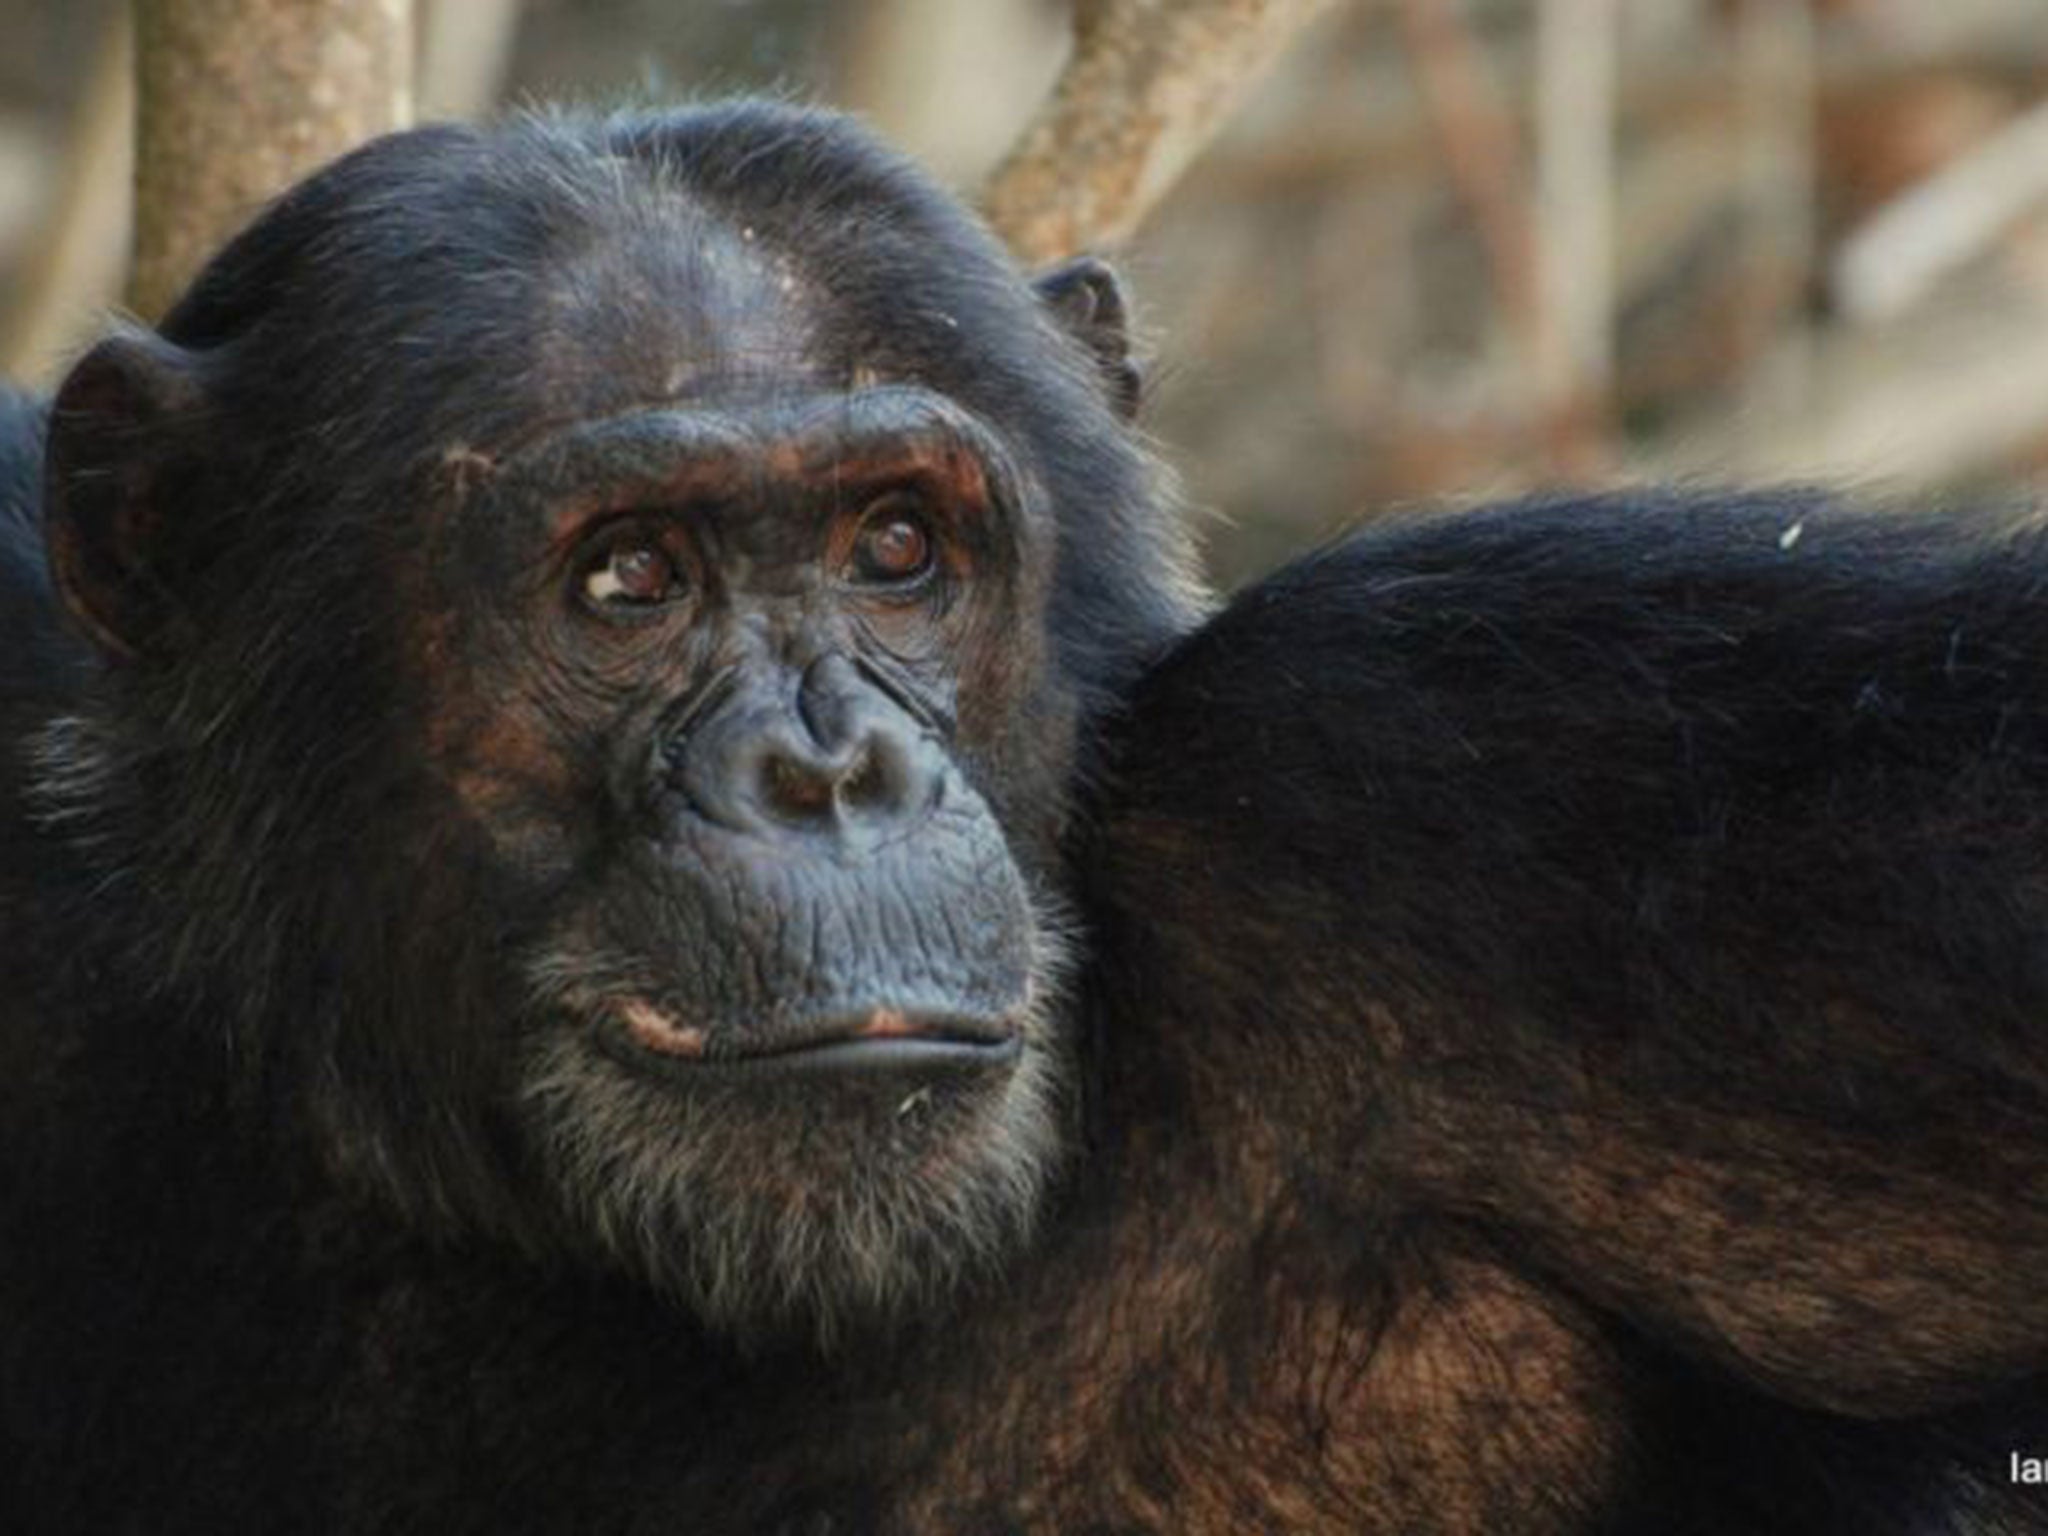 A US court is set to rule if a chimpanzee can be afforded the same legal rights as a human